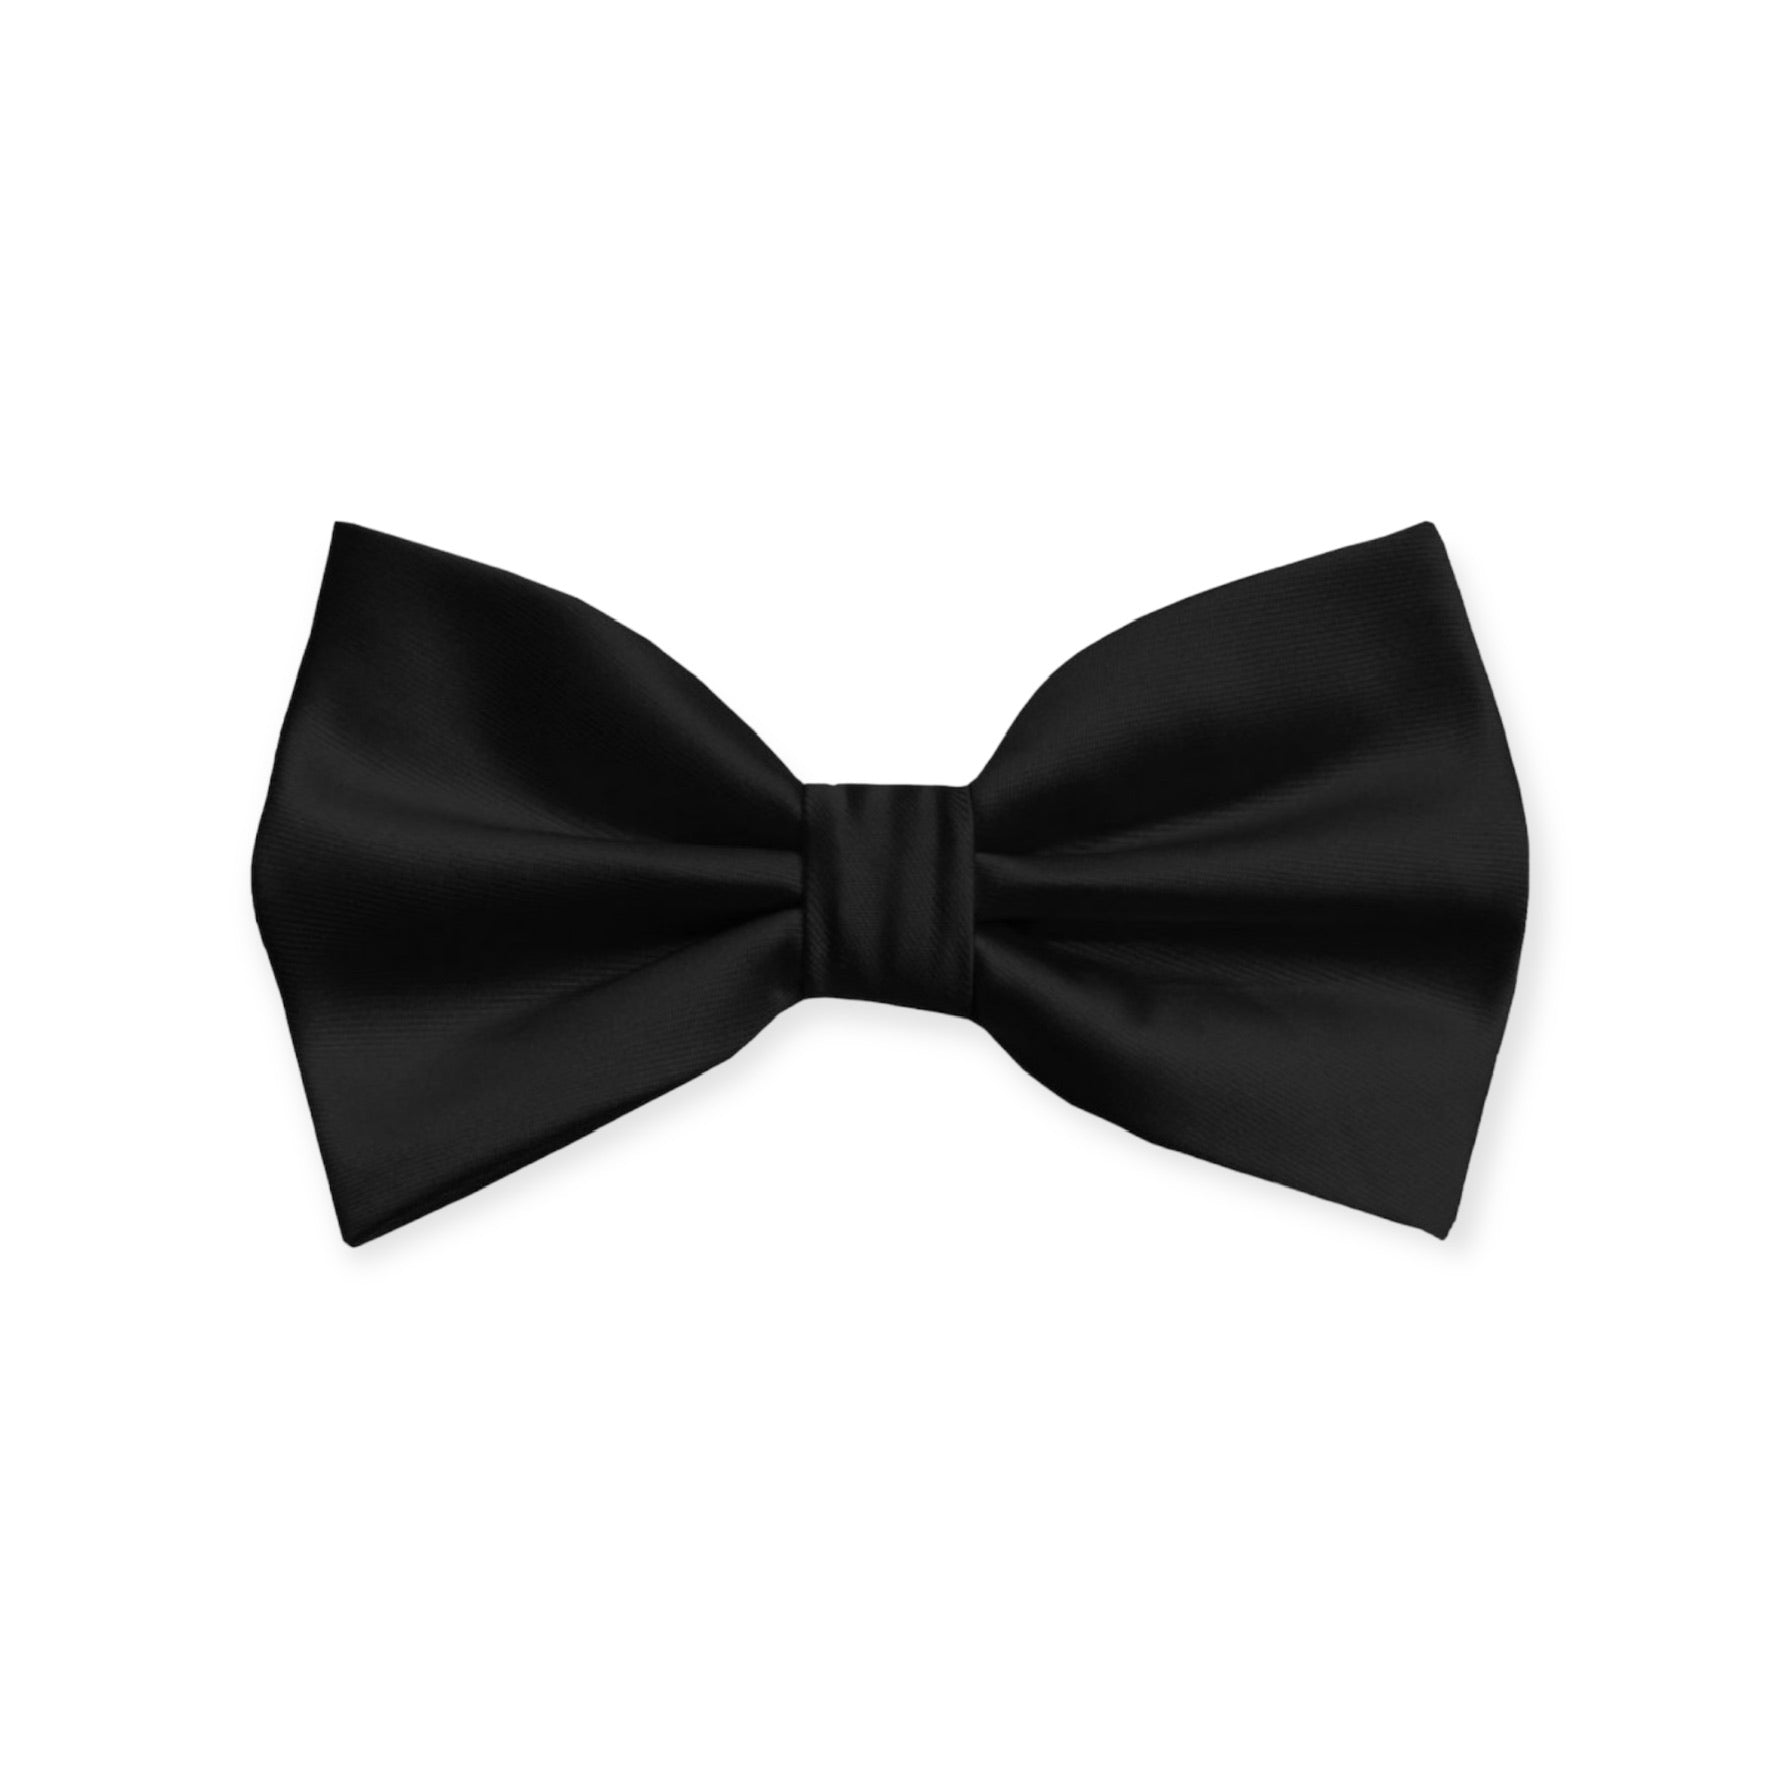 Solid Black Bow Tie and Hanky